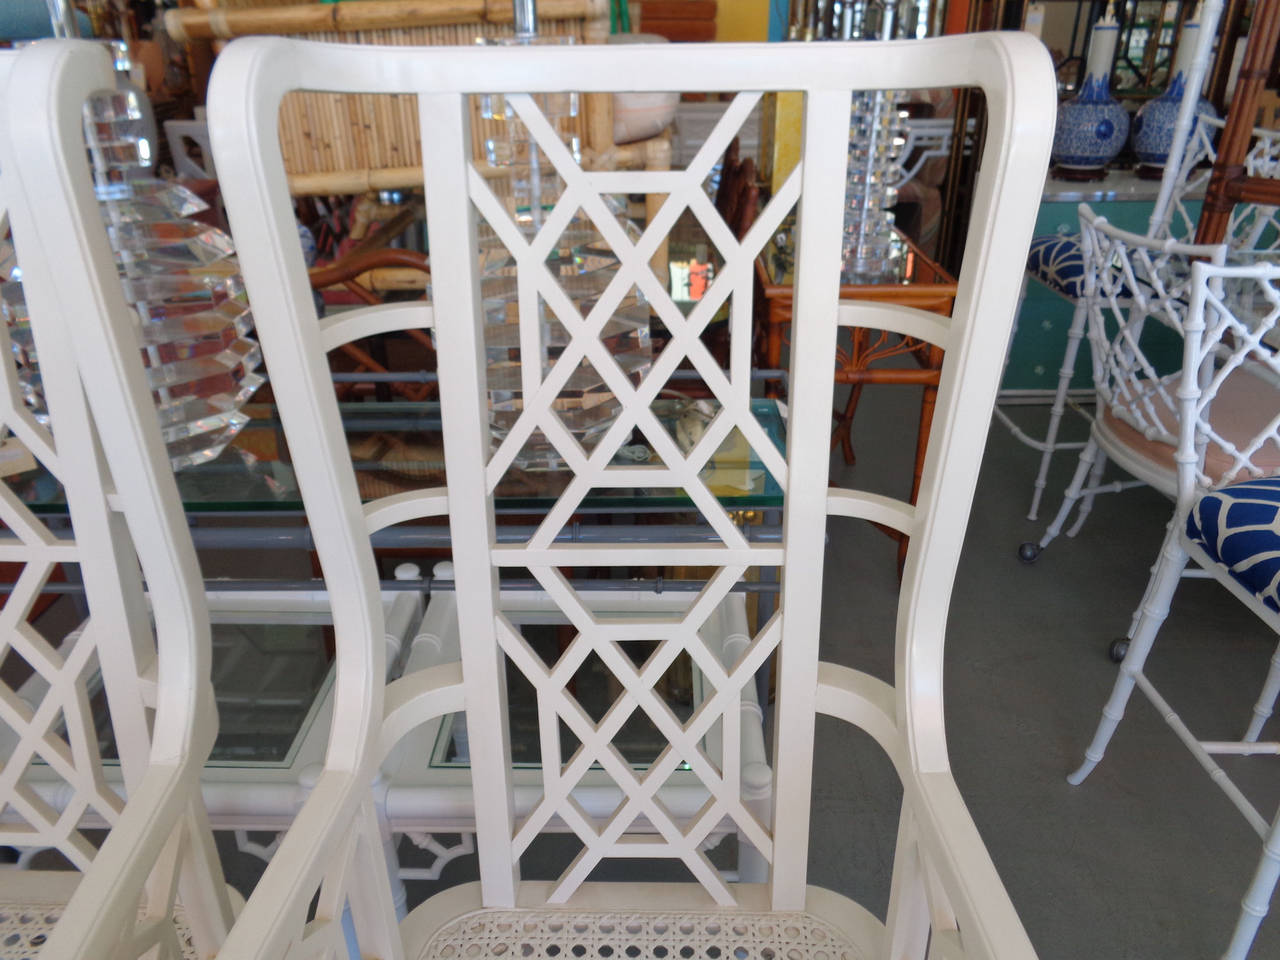 Pair of Hollywood Regency Style Fretwork Wing Chairs with caned seats in good as found vintage condition. There are scuffs, scrapes and chips to the as found finish.